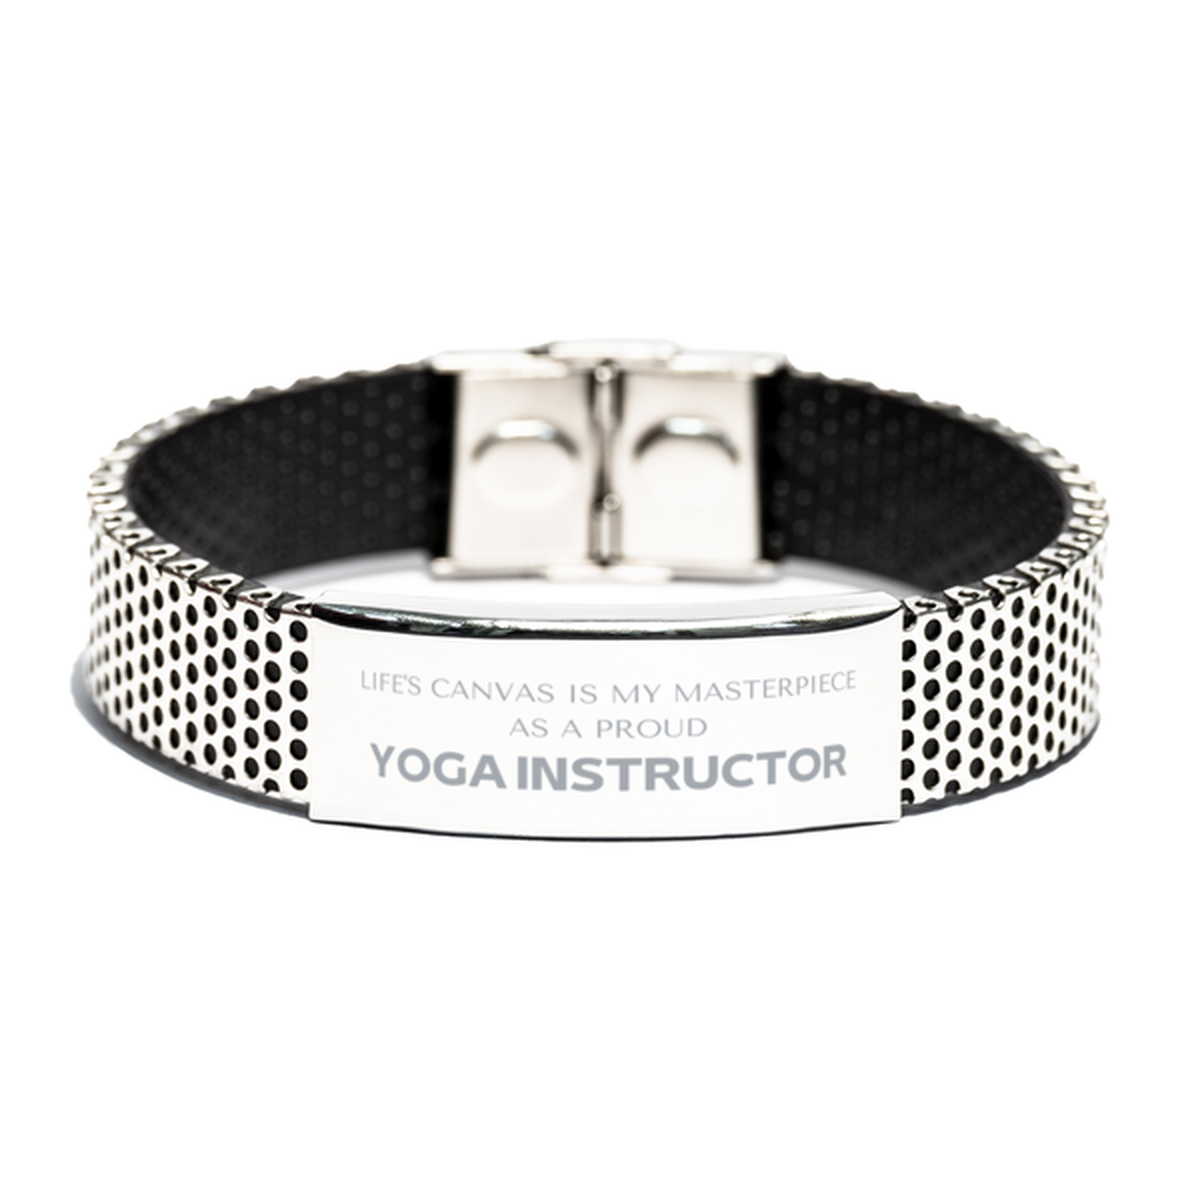 Proud Yoga Instructor Gifts, Life's canvas is my masterpiece, Epic Birthday Christmas Unique Stainless Steel Bracelet For Yoga Instructor, Coworkers, Men, Women, Friends